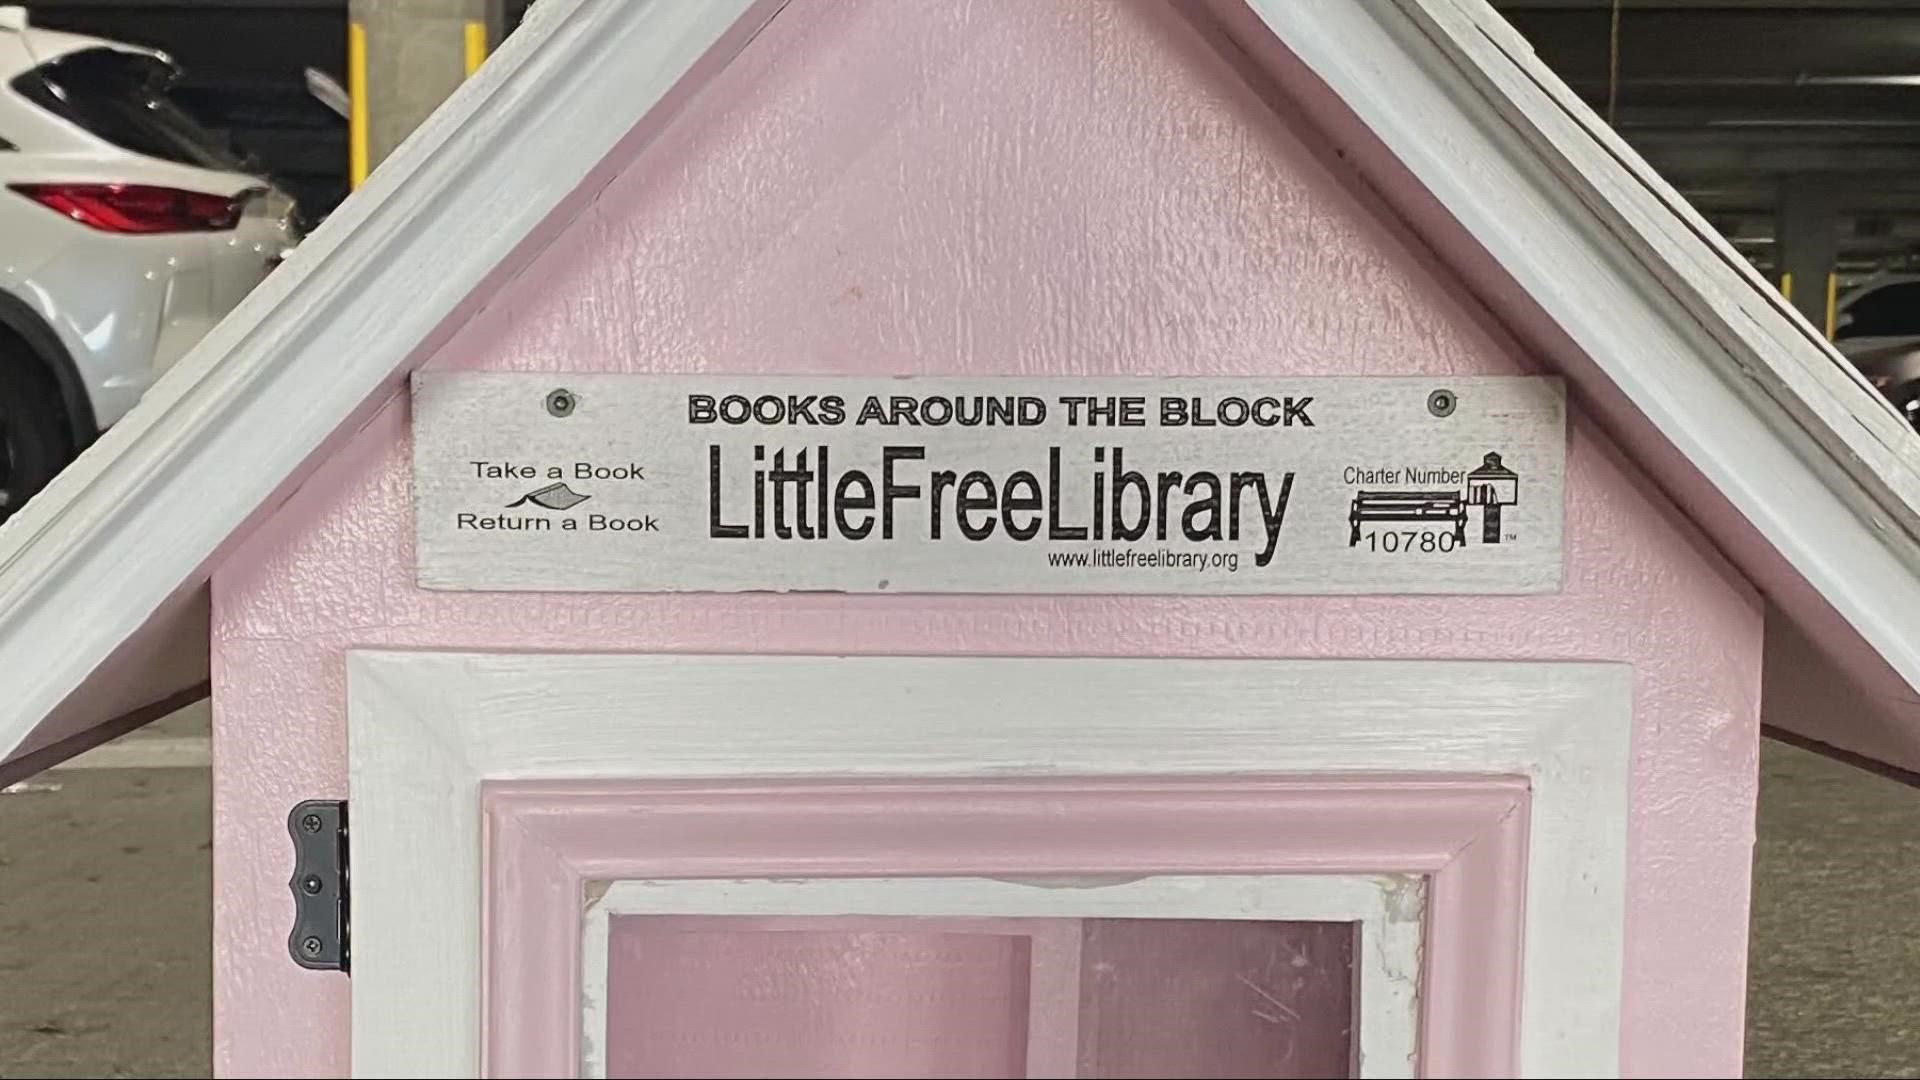 Plenty of good reads and some community spirit too! 3News anchor Jay Crawford is here to teach you how to build a Little Free Library in your own community.